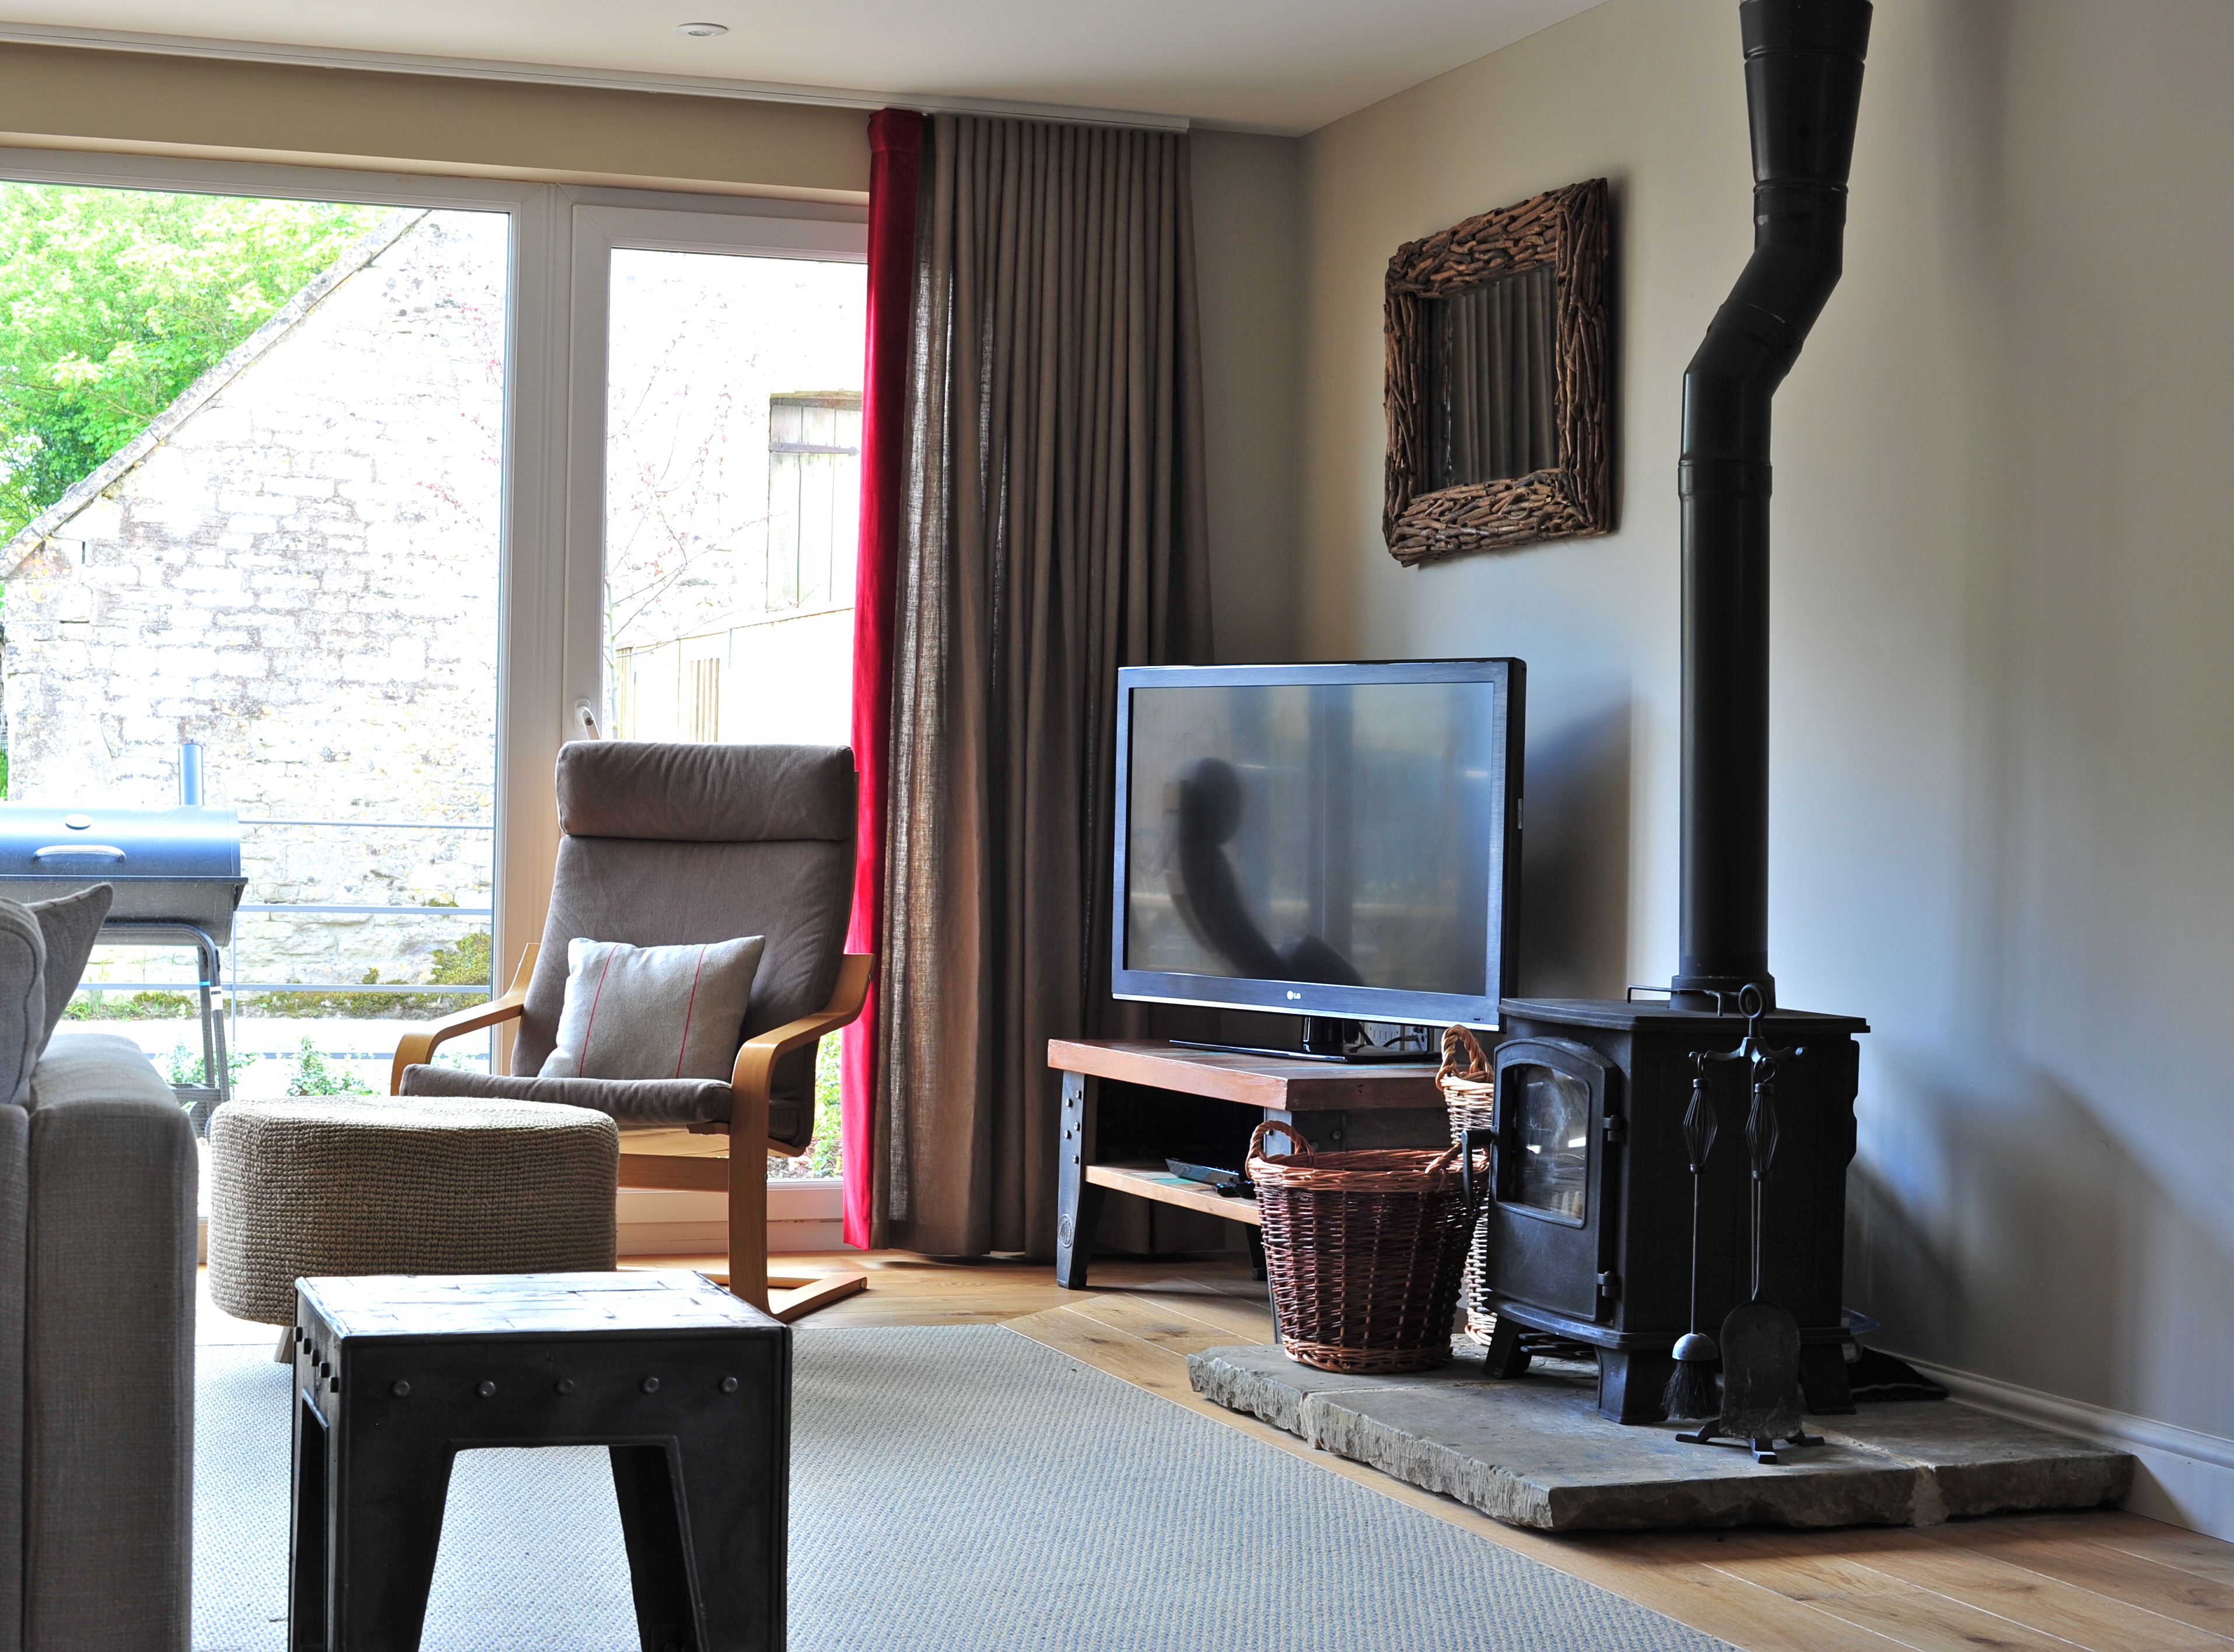 Barns at Notgrove - cosy living space with a wood burner